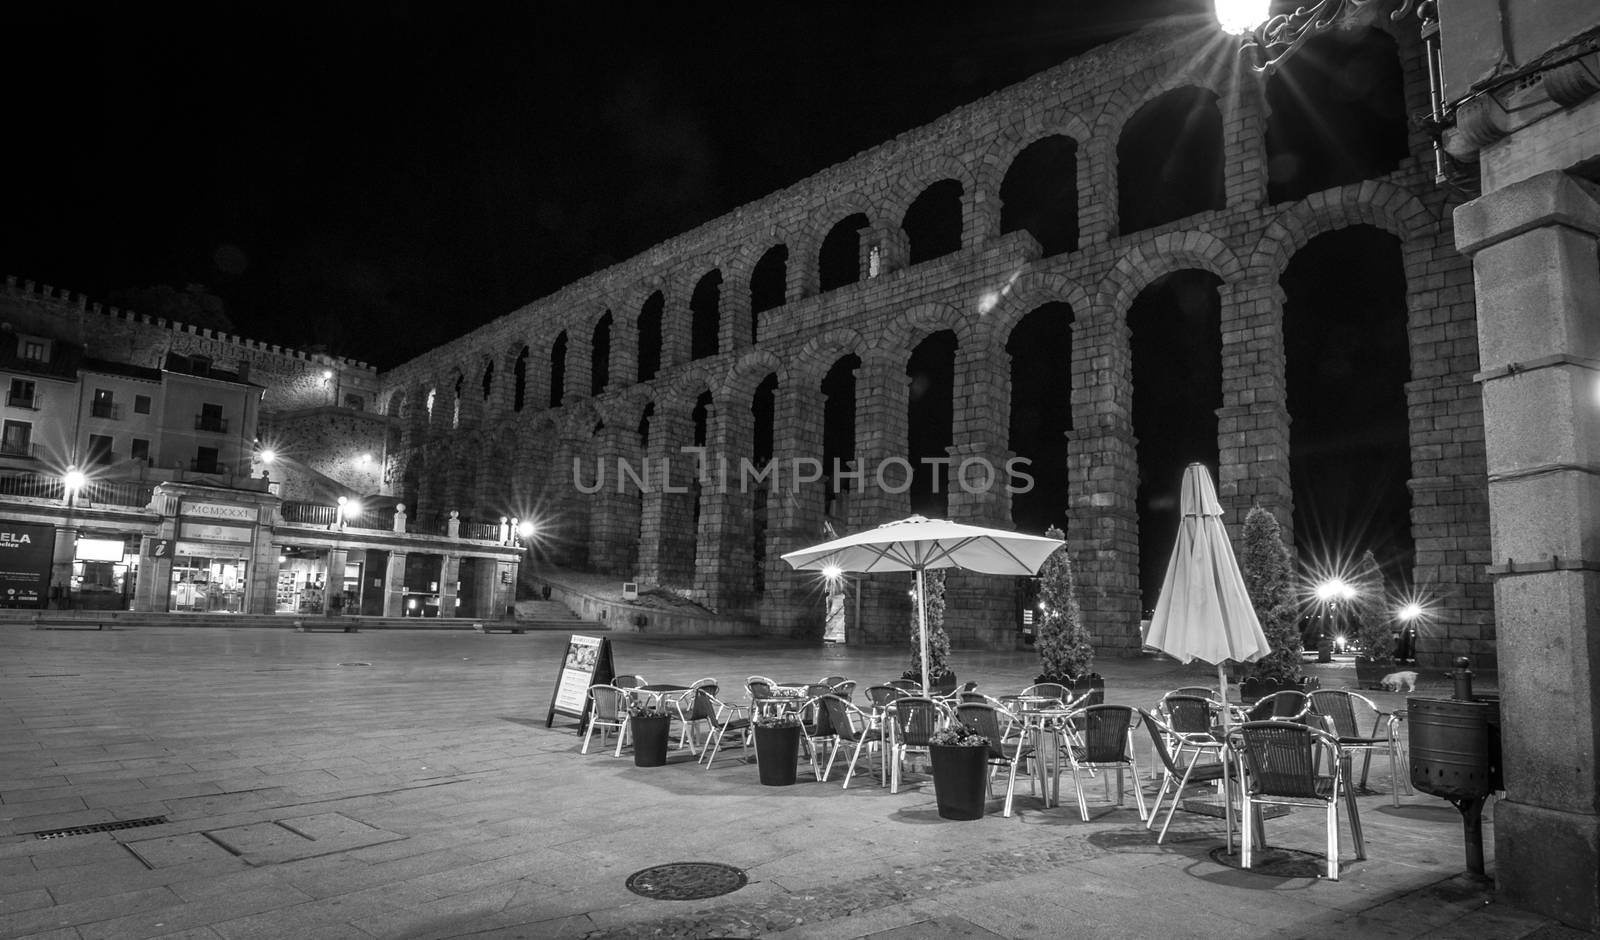 The magnificent Segovia Aqueduct in black and white at night.